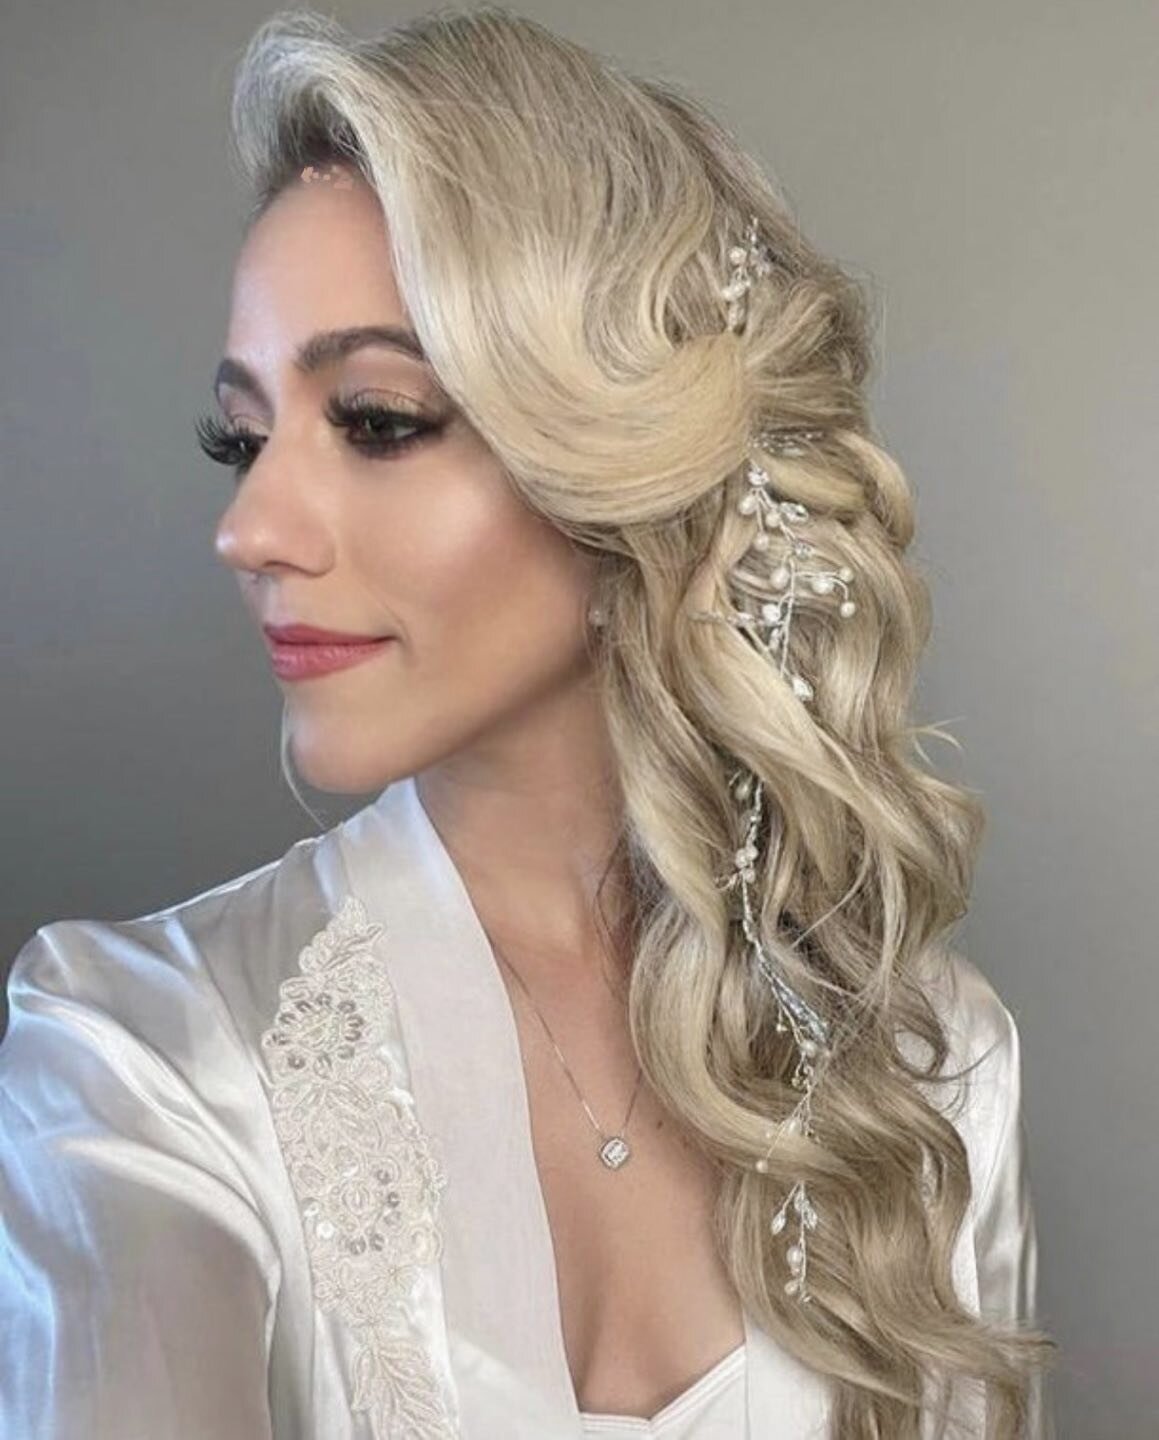 Detailed Side Hair Style,
that looks soft yet very much contained to last a whole night of dancing. 
 
Contact us to discus your dream look
Bio in the Link

#destinationwedding#Aruba#travelingartist#bridalmakeupandhair#longislandartists#newyorkmakeup